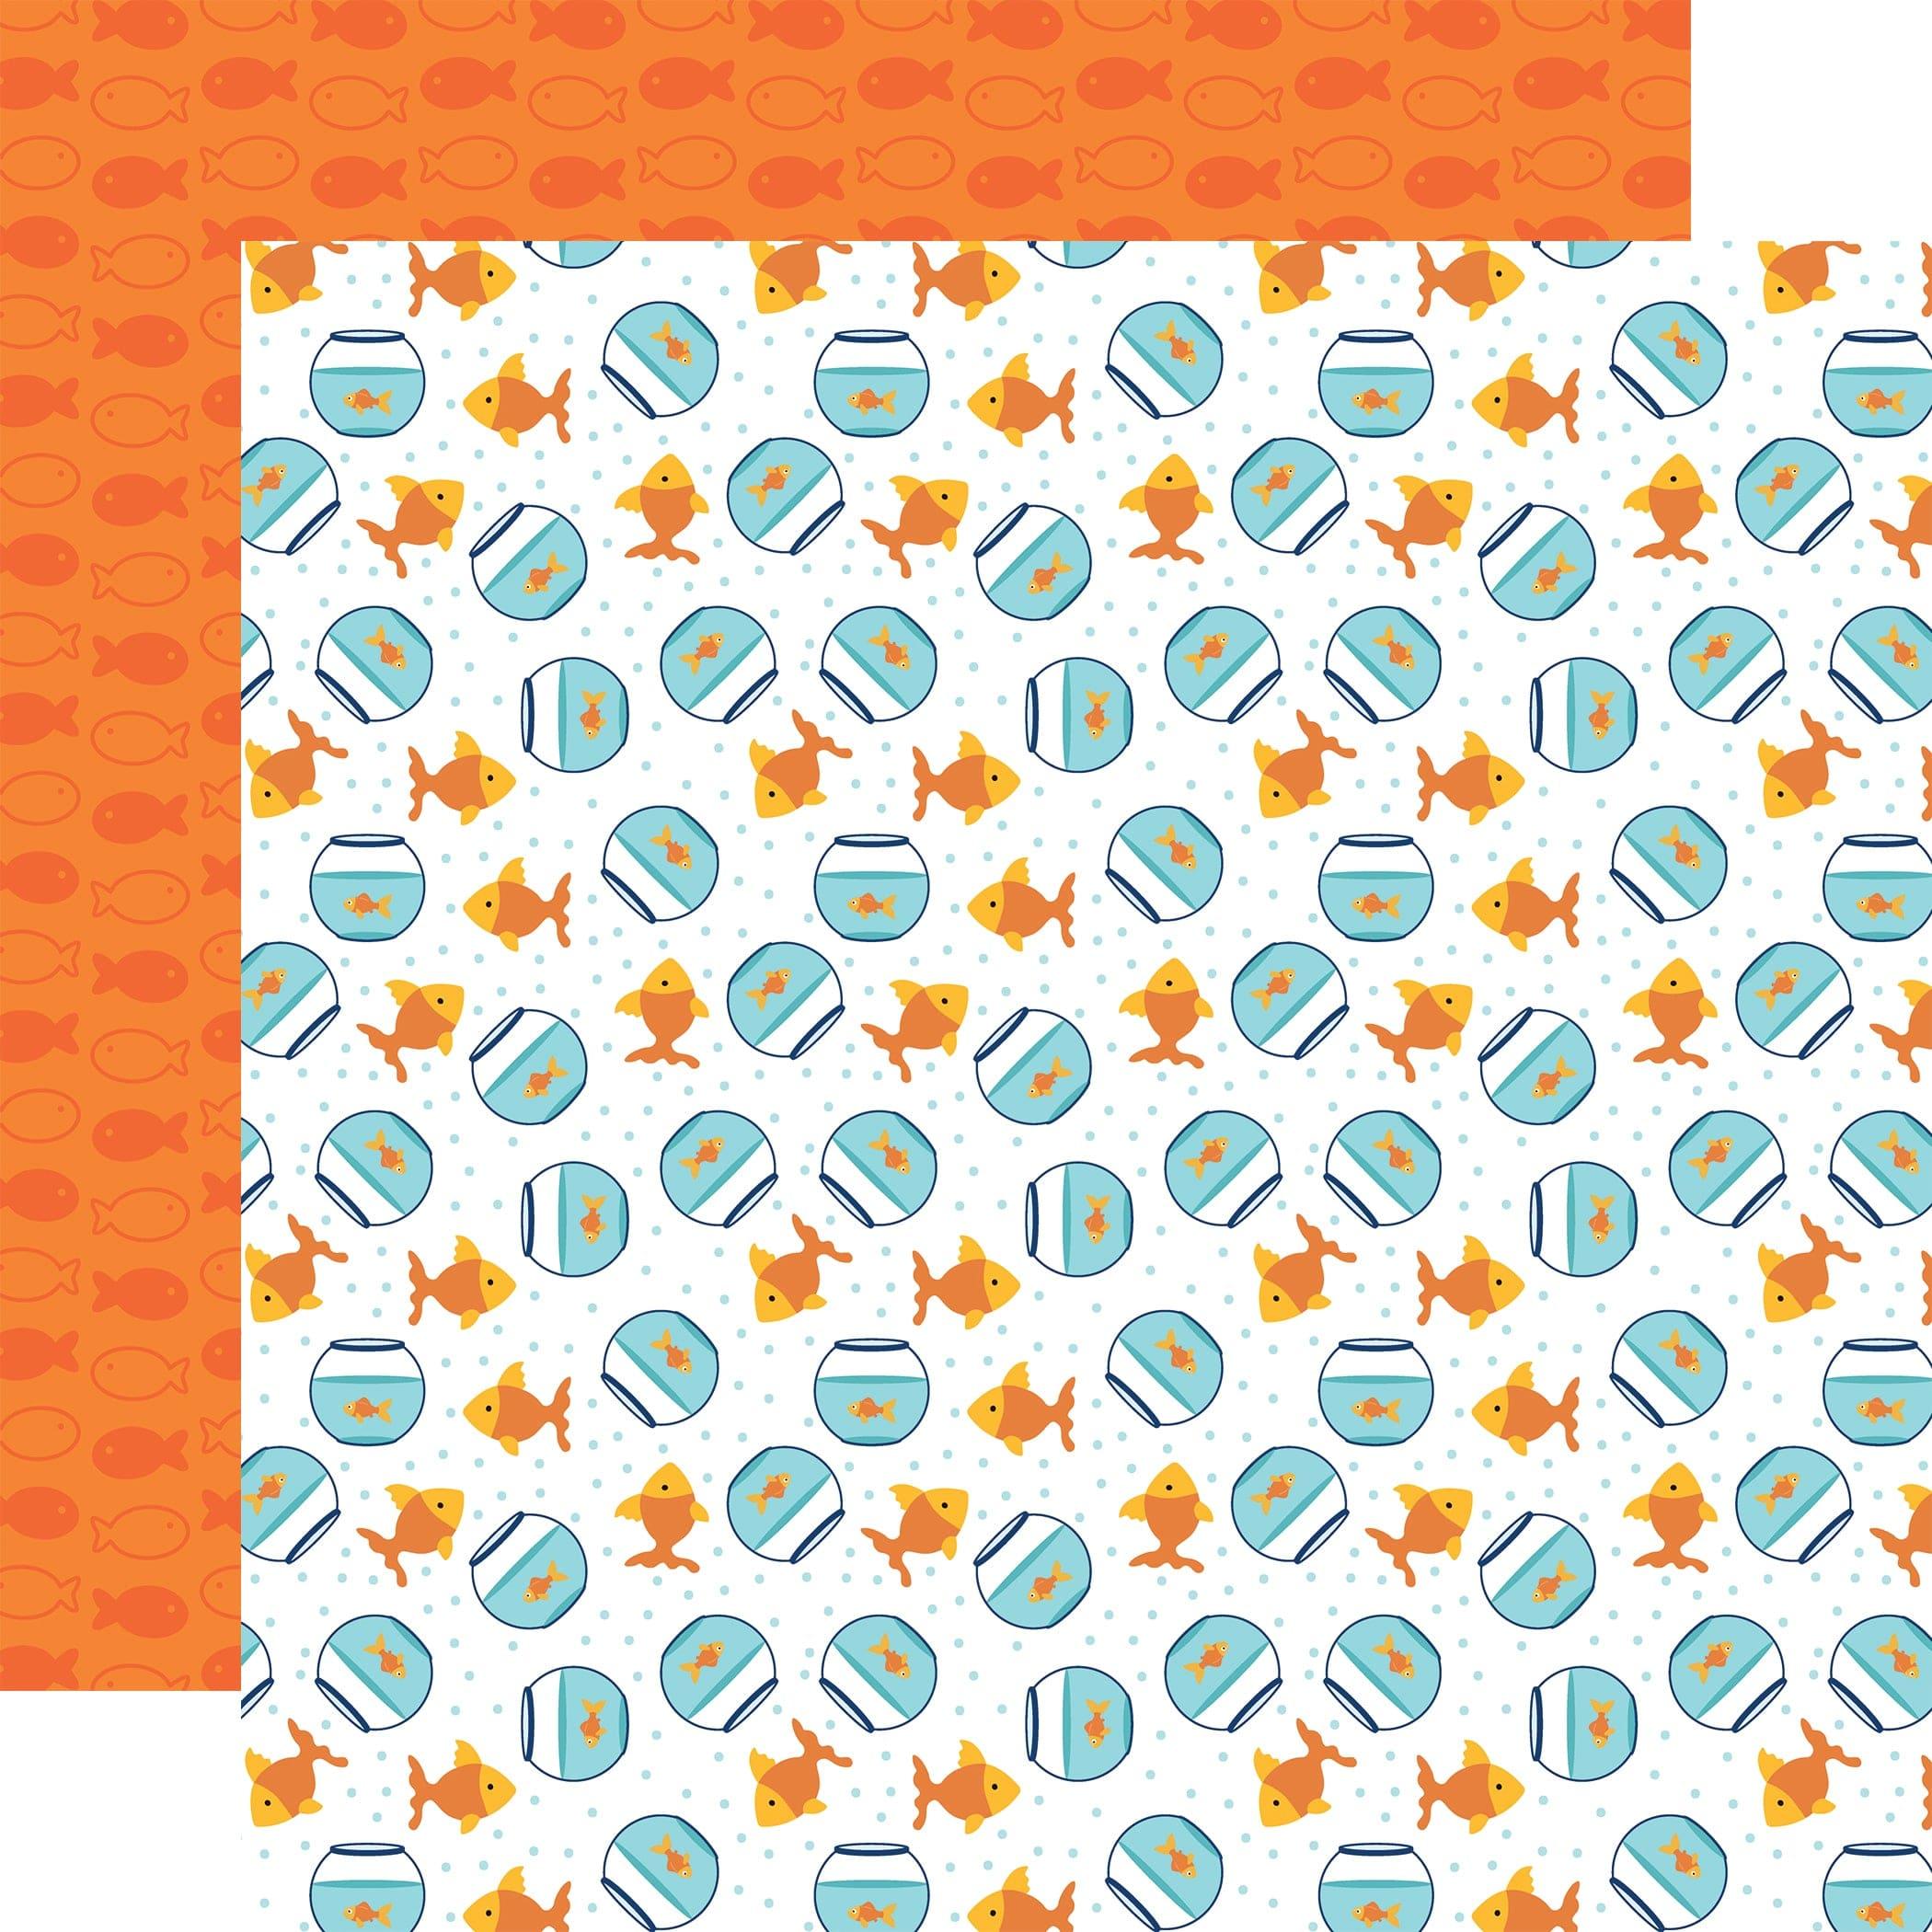 Pets Collection Fish Friends 12 x 12 Double-Sided Scrapbook Paper by Echo Park Paper